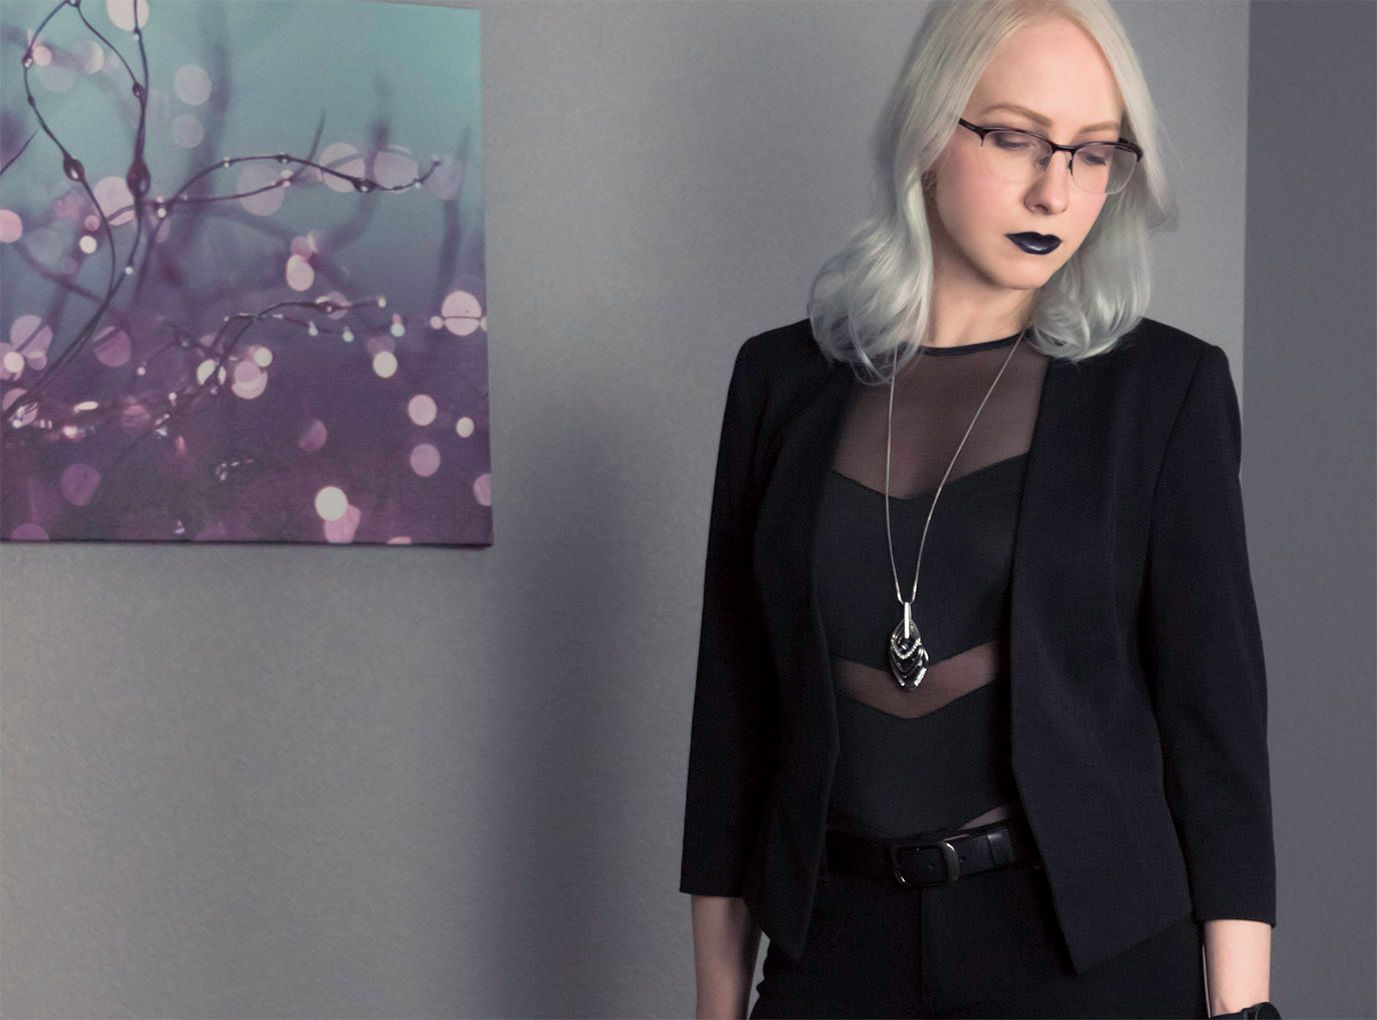 Top 4 Corporate Goth Fashion Staples